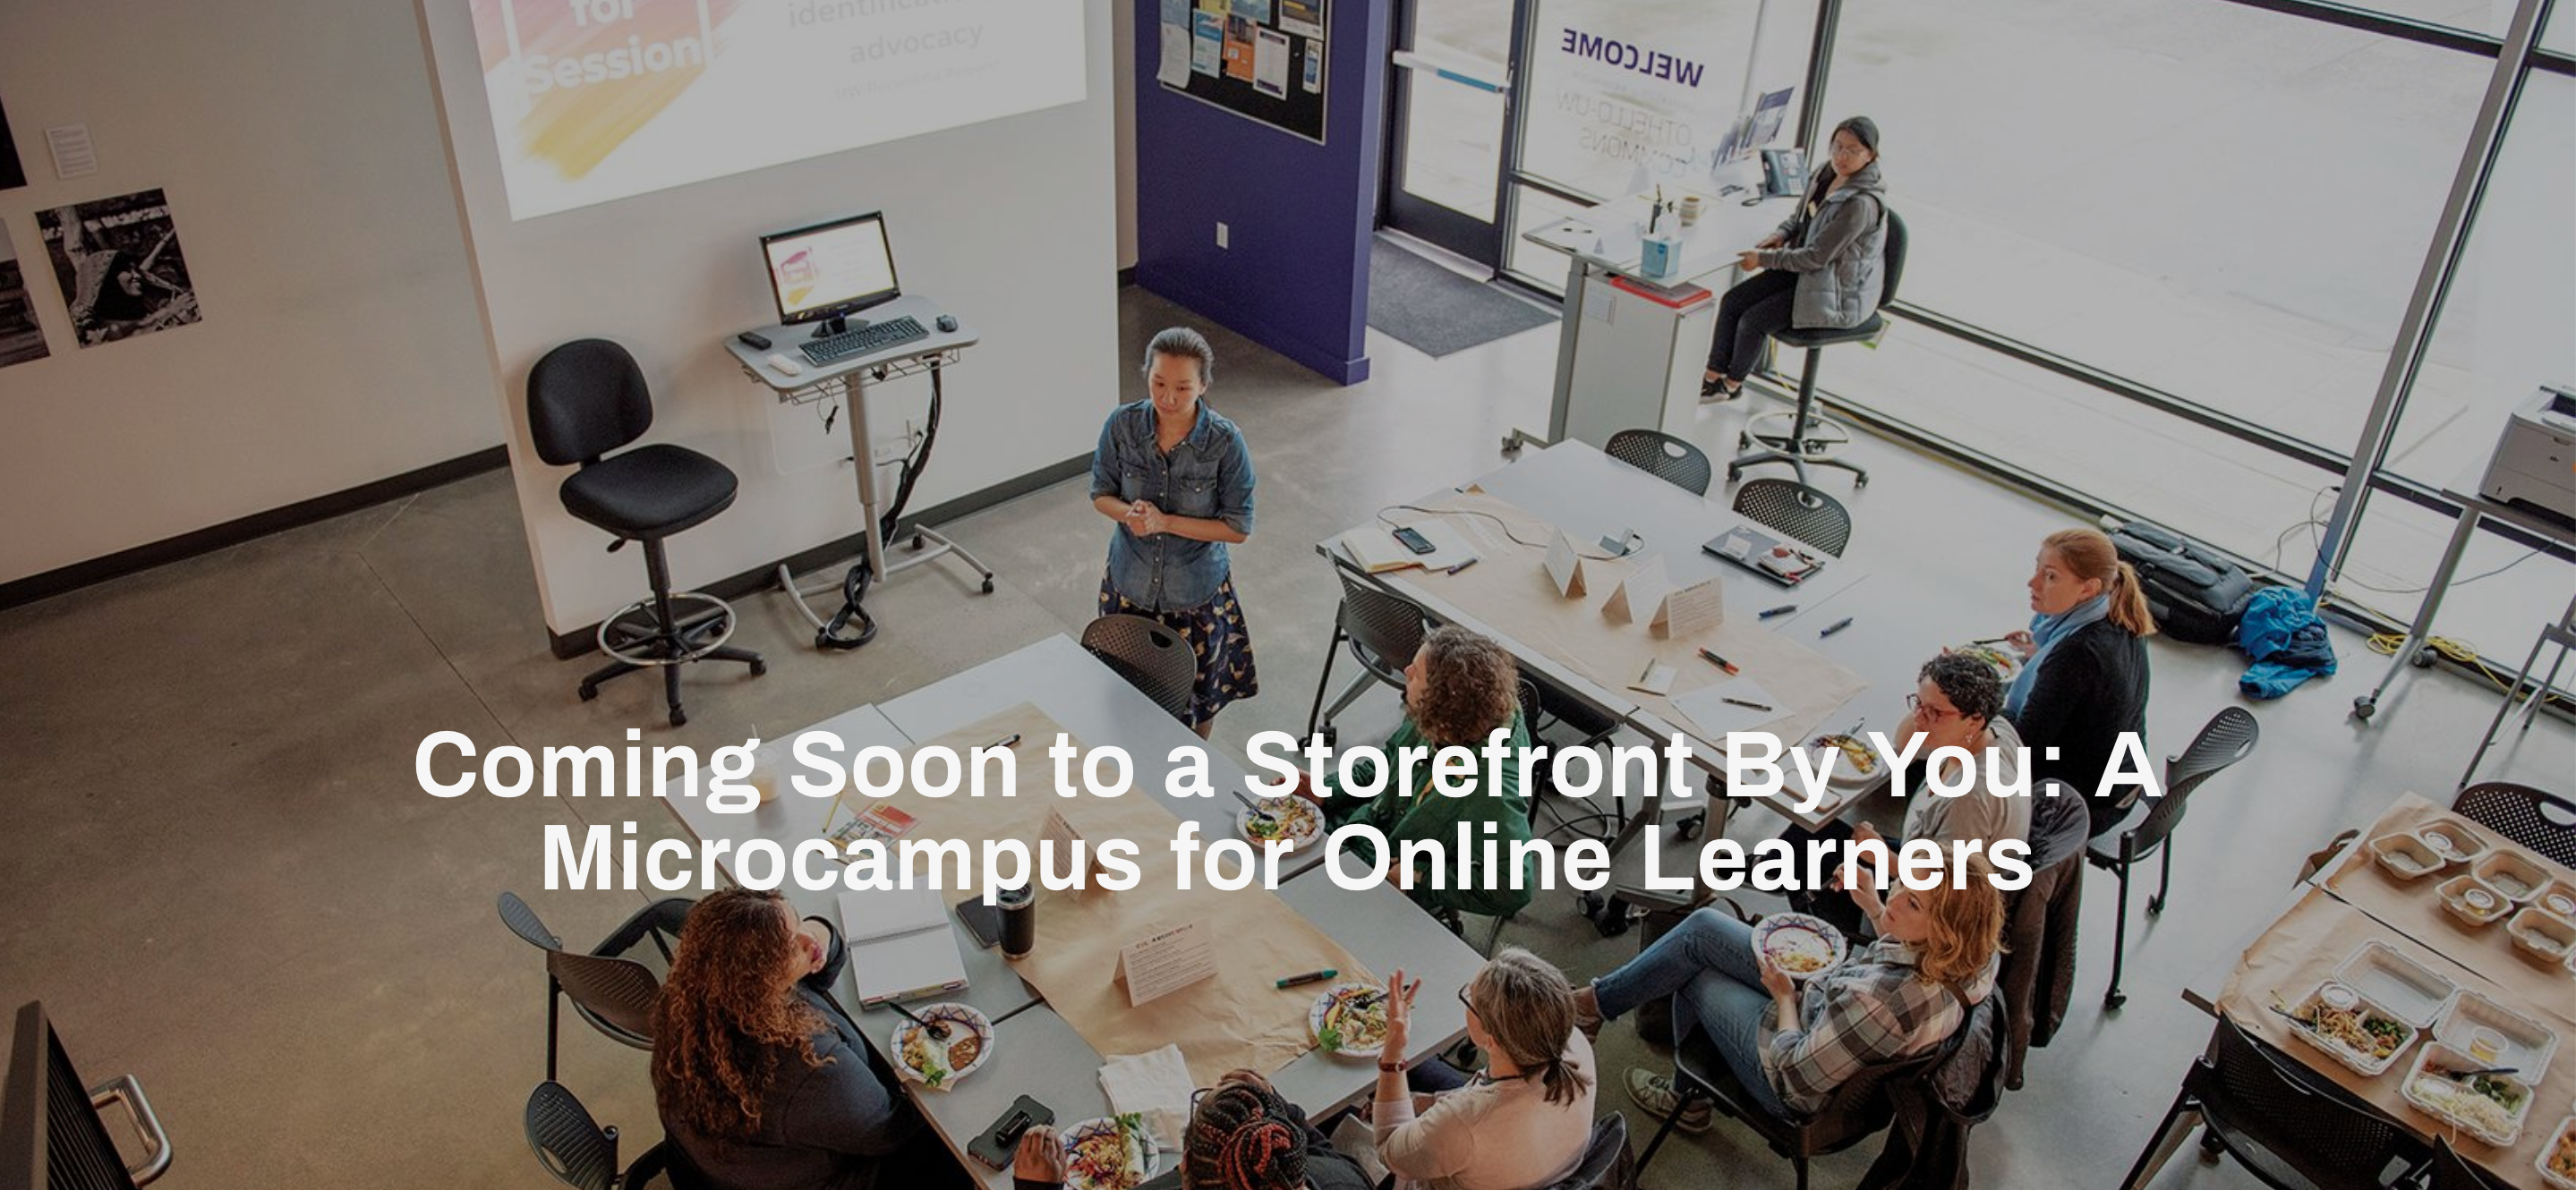 Coming Soon to a Storefront By You: A Microcampus for Online Learners